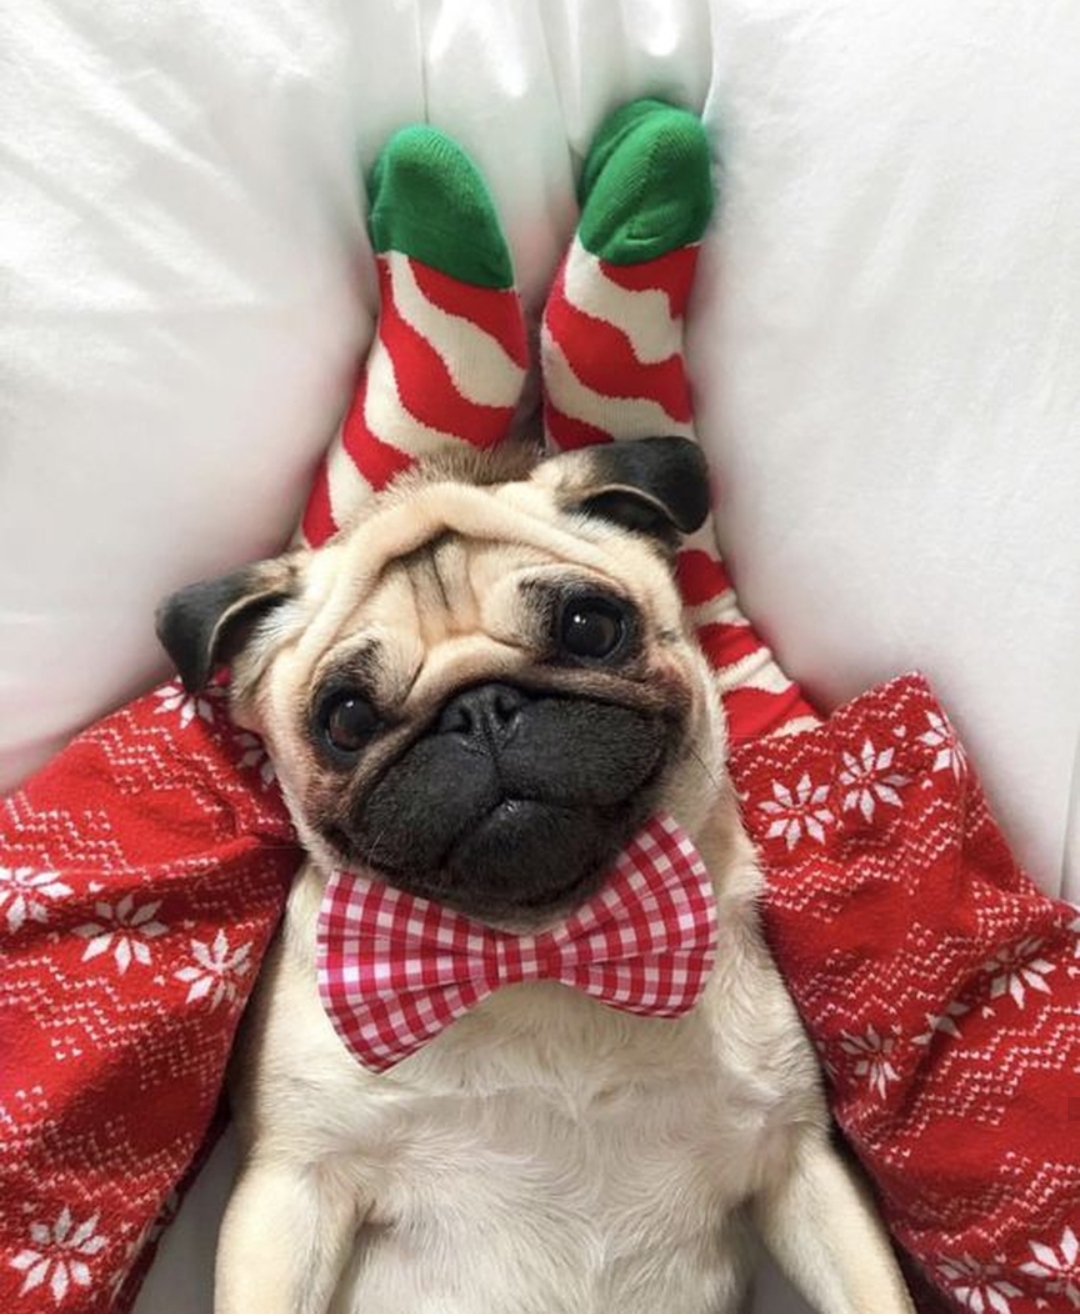 Pug smiling sweetly while wearing a checkered red bow tie while lying in between the legs of a woman wearing a christmas socks and pajamas on the bed